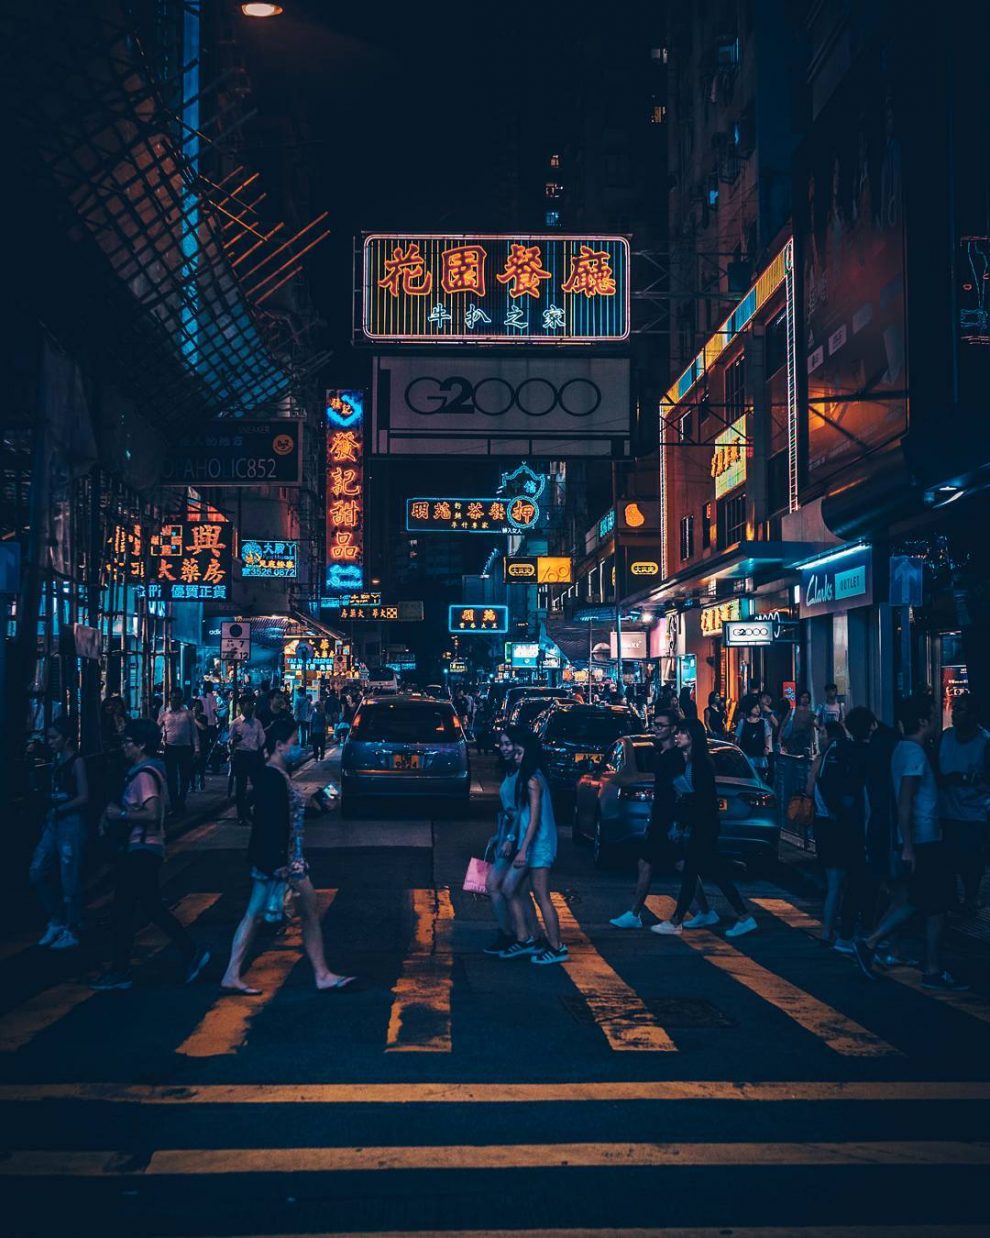 Cyberpunk Street Photos In Hong Kong By Andy Knives » Design You Trust ...